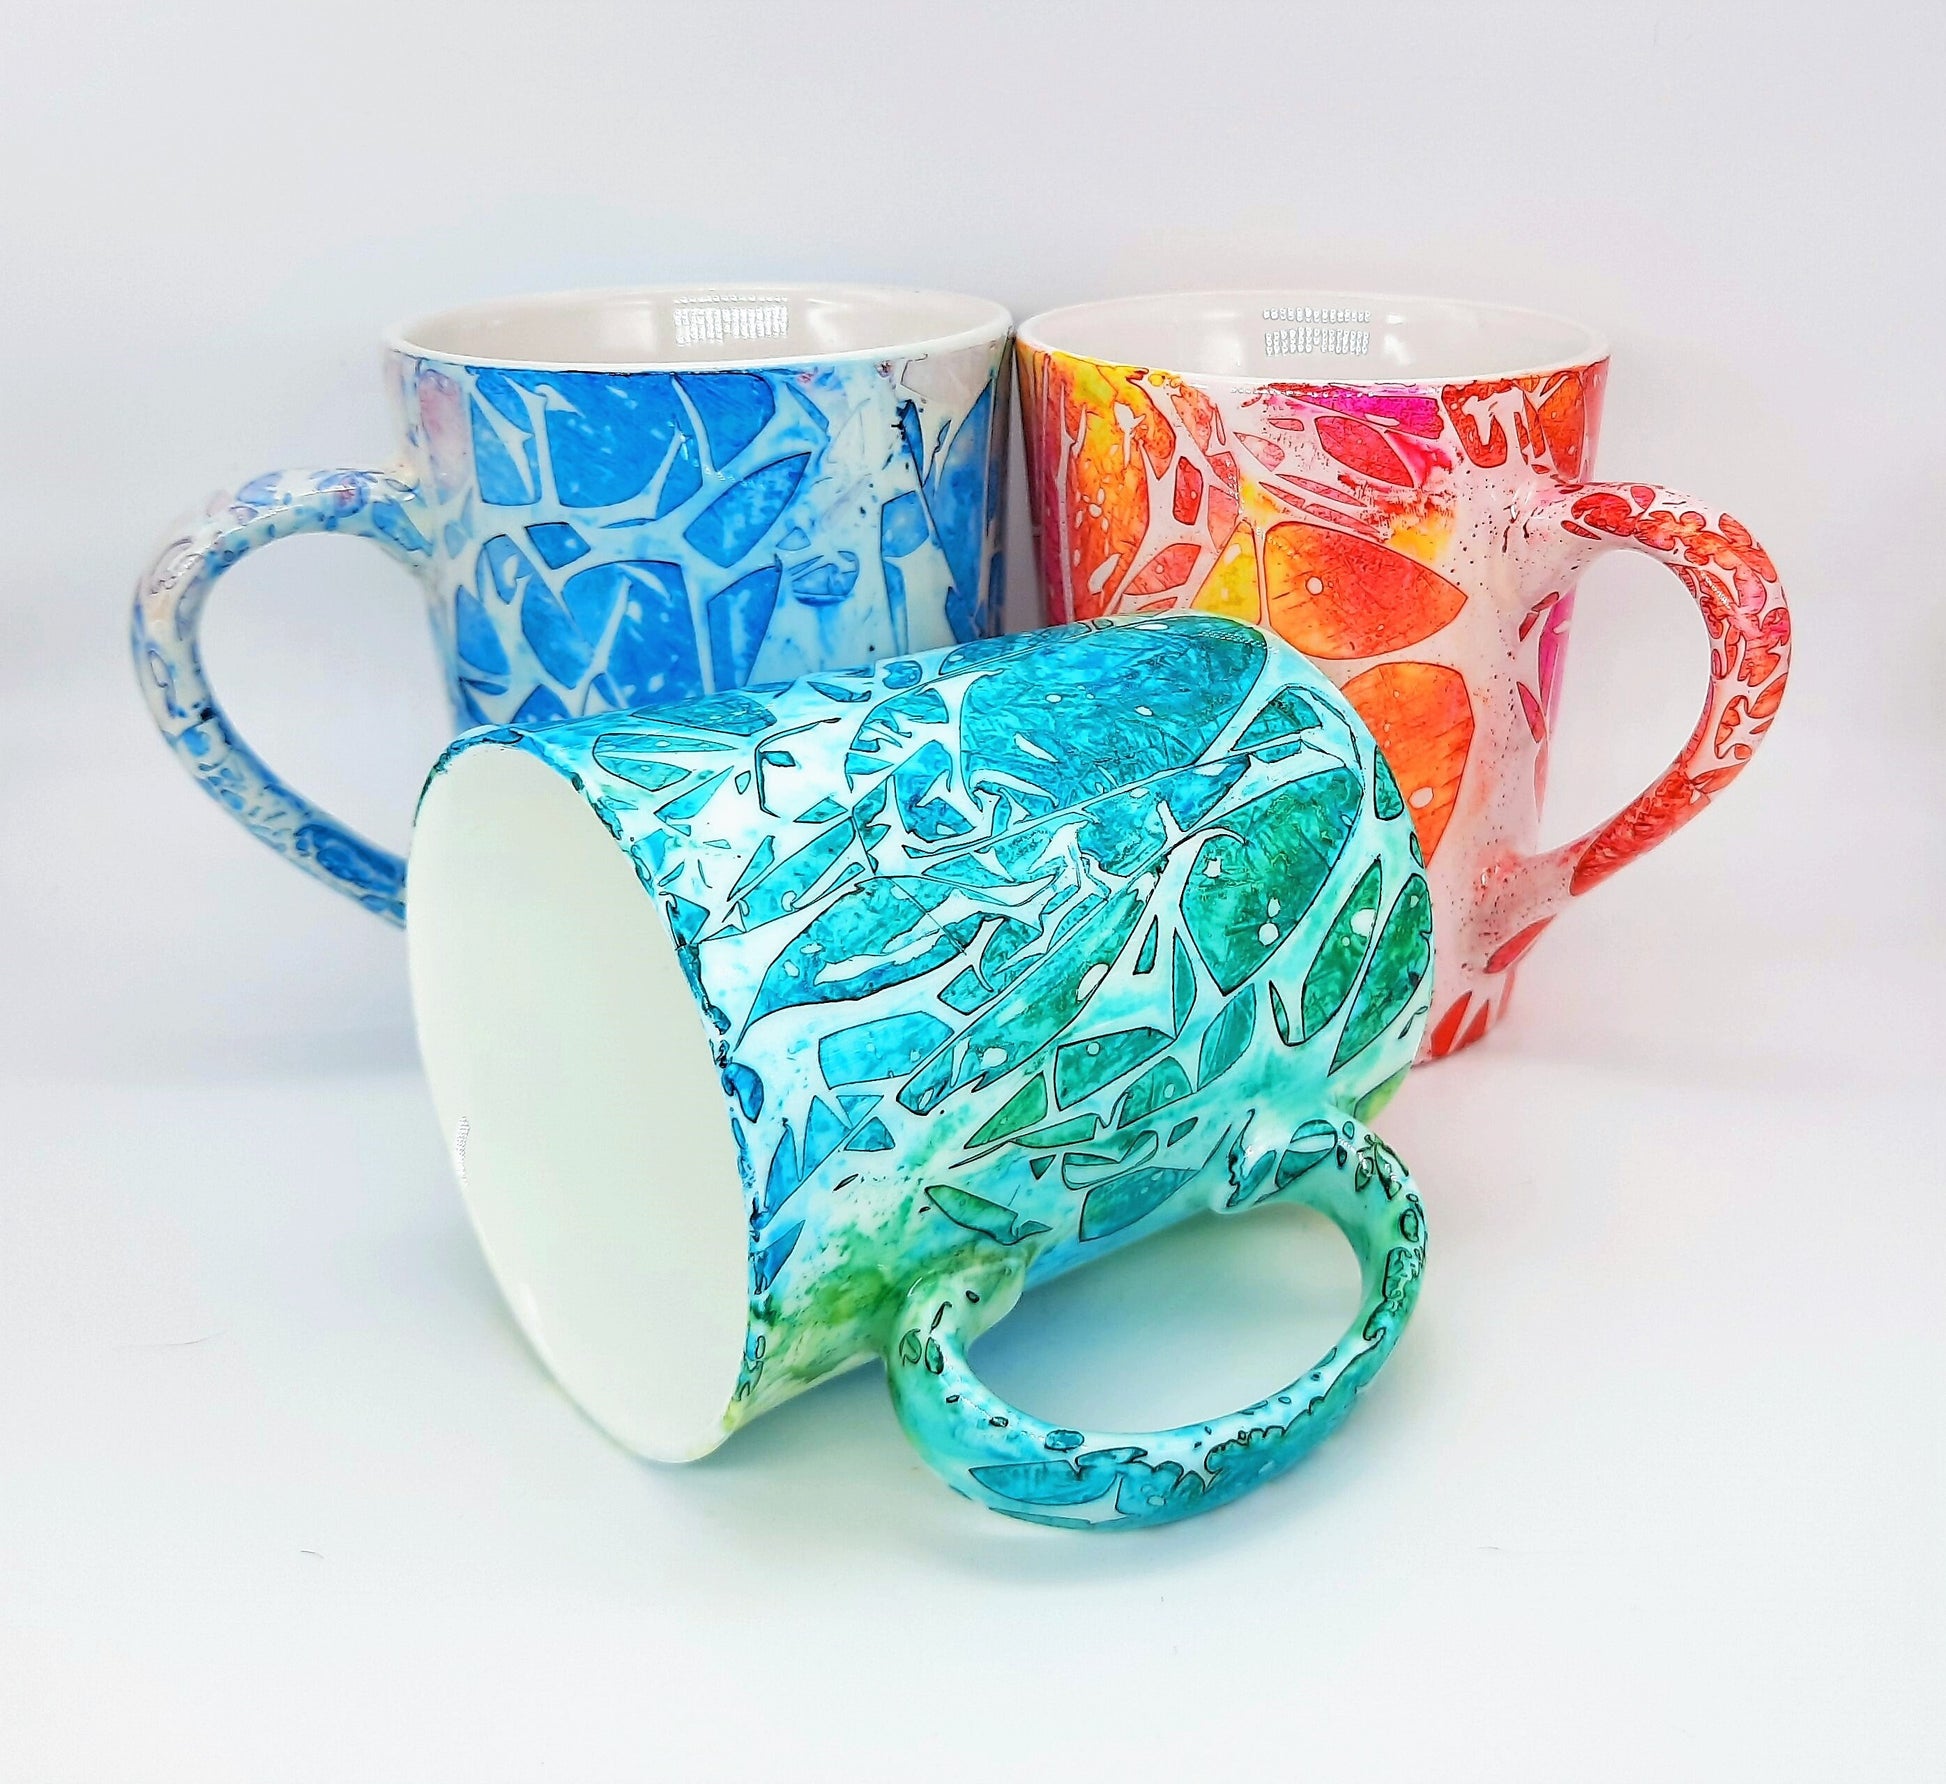 Blue & Green Abstract Alcohol Ink 12 oz Ceramic Coffee Mug, Handpainted and Sealed with Resin, One of a Kind, Unique, Bright